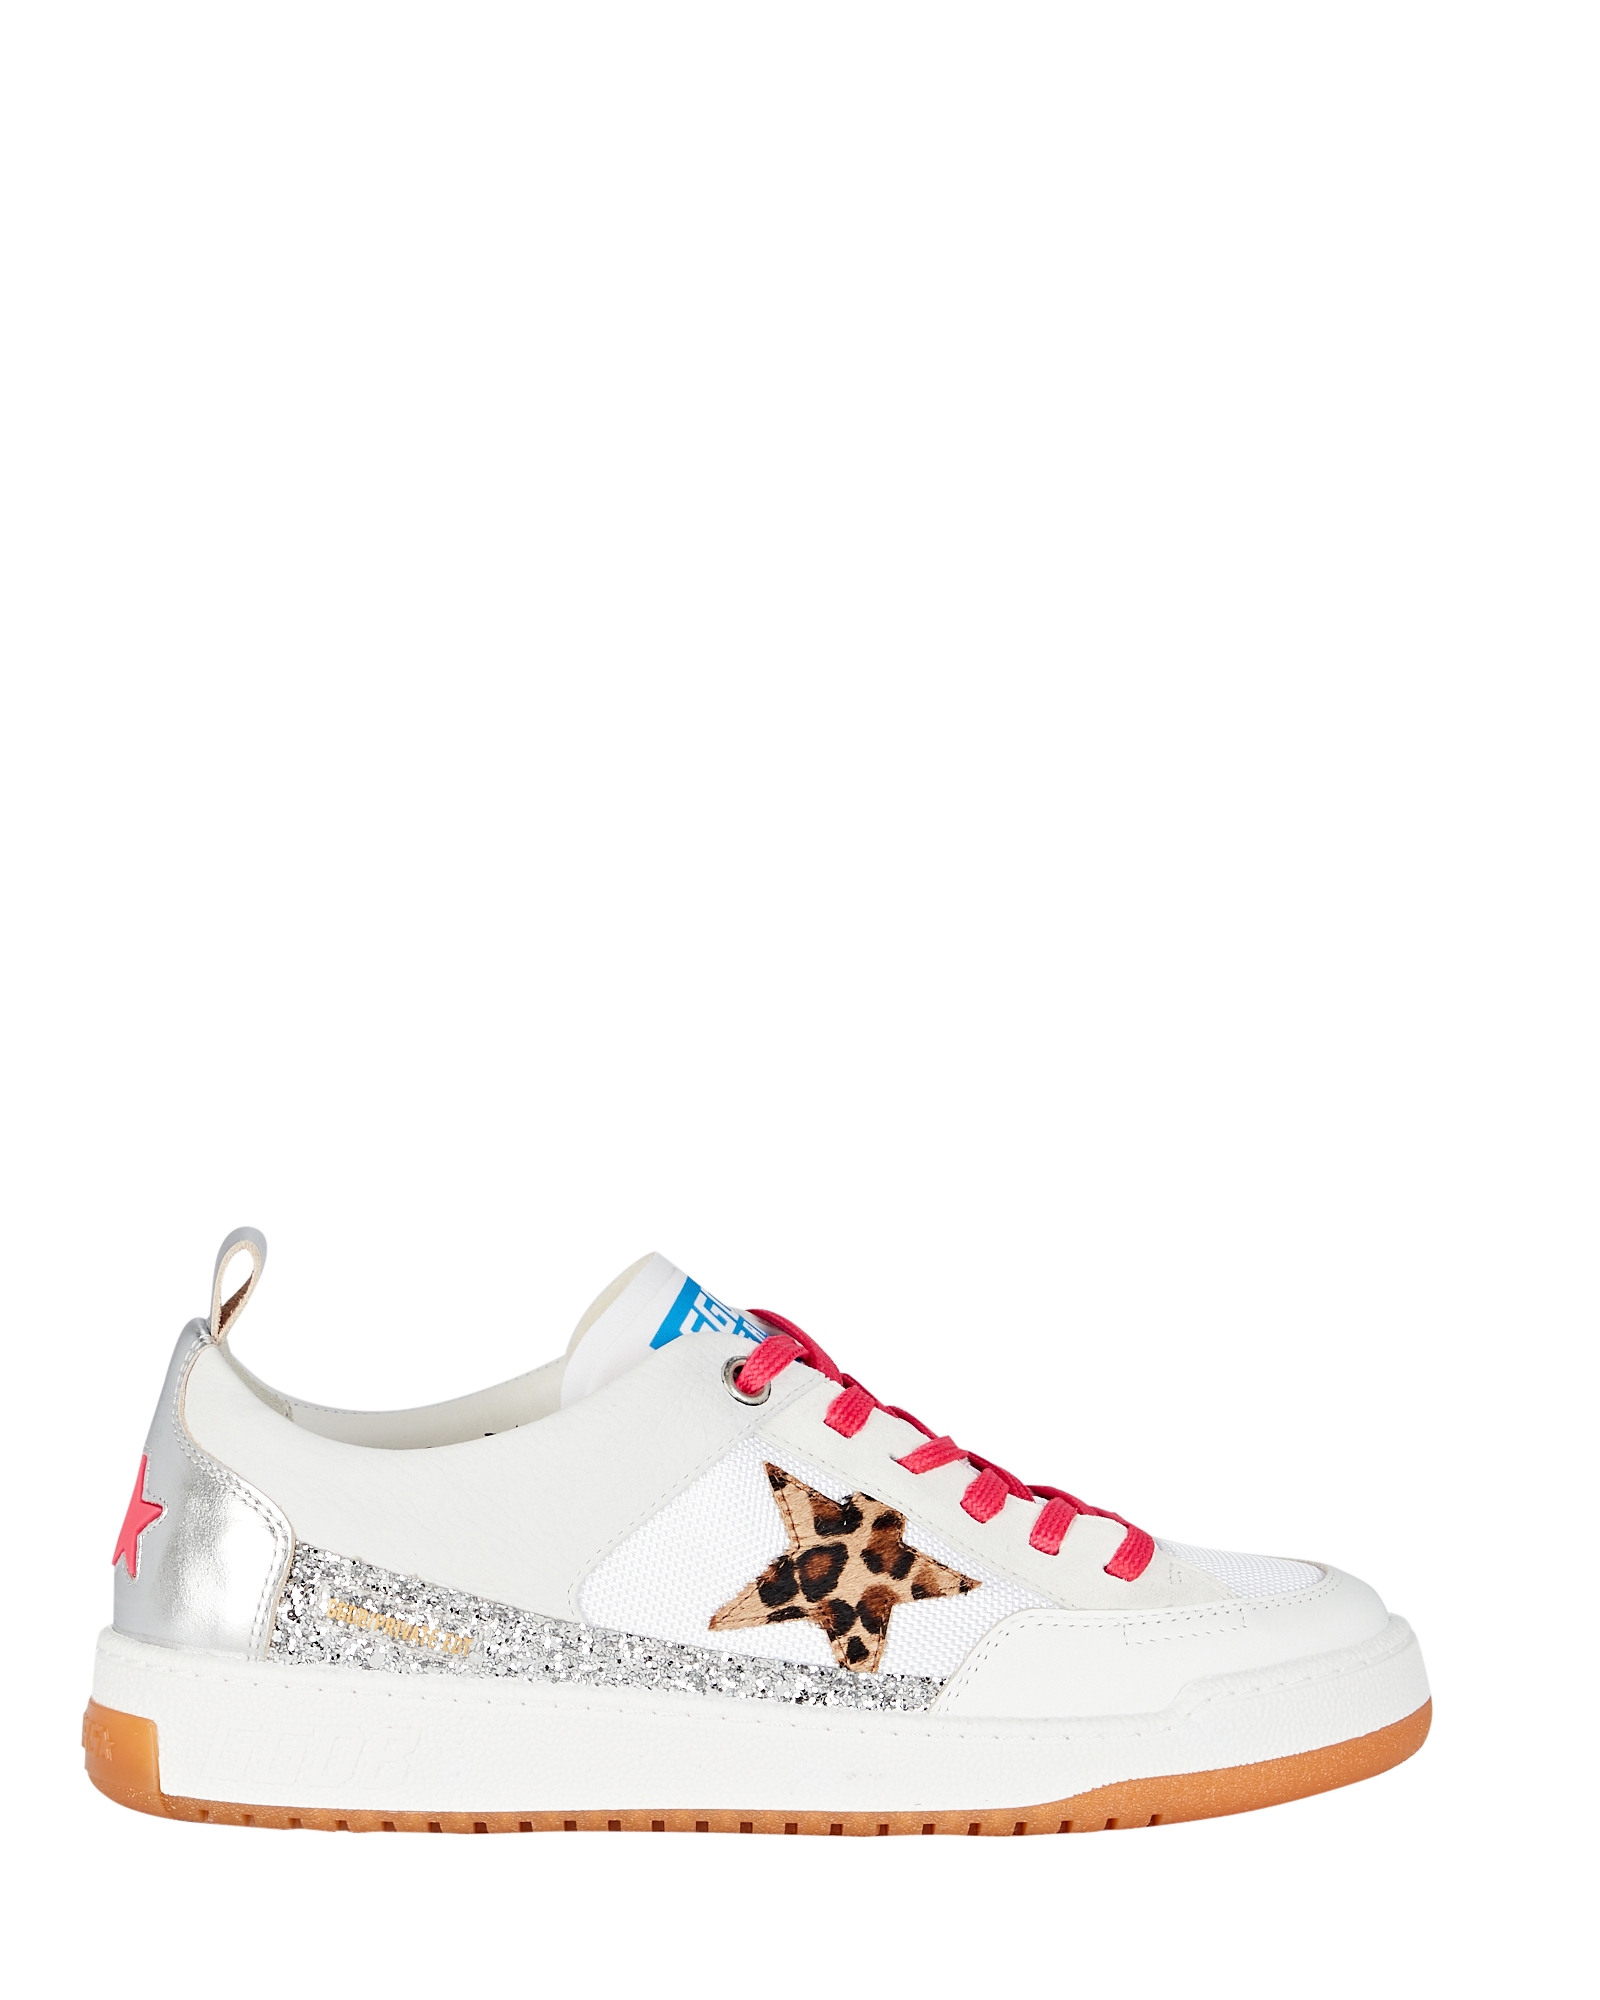 Golden Goose Yeah Leather Low-Top Sneakers in White | INTERMIX®